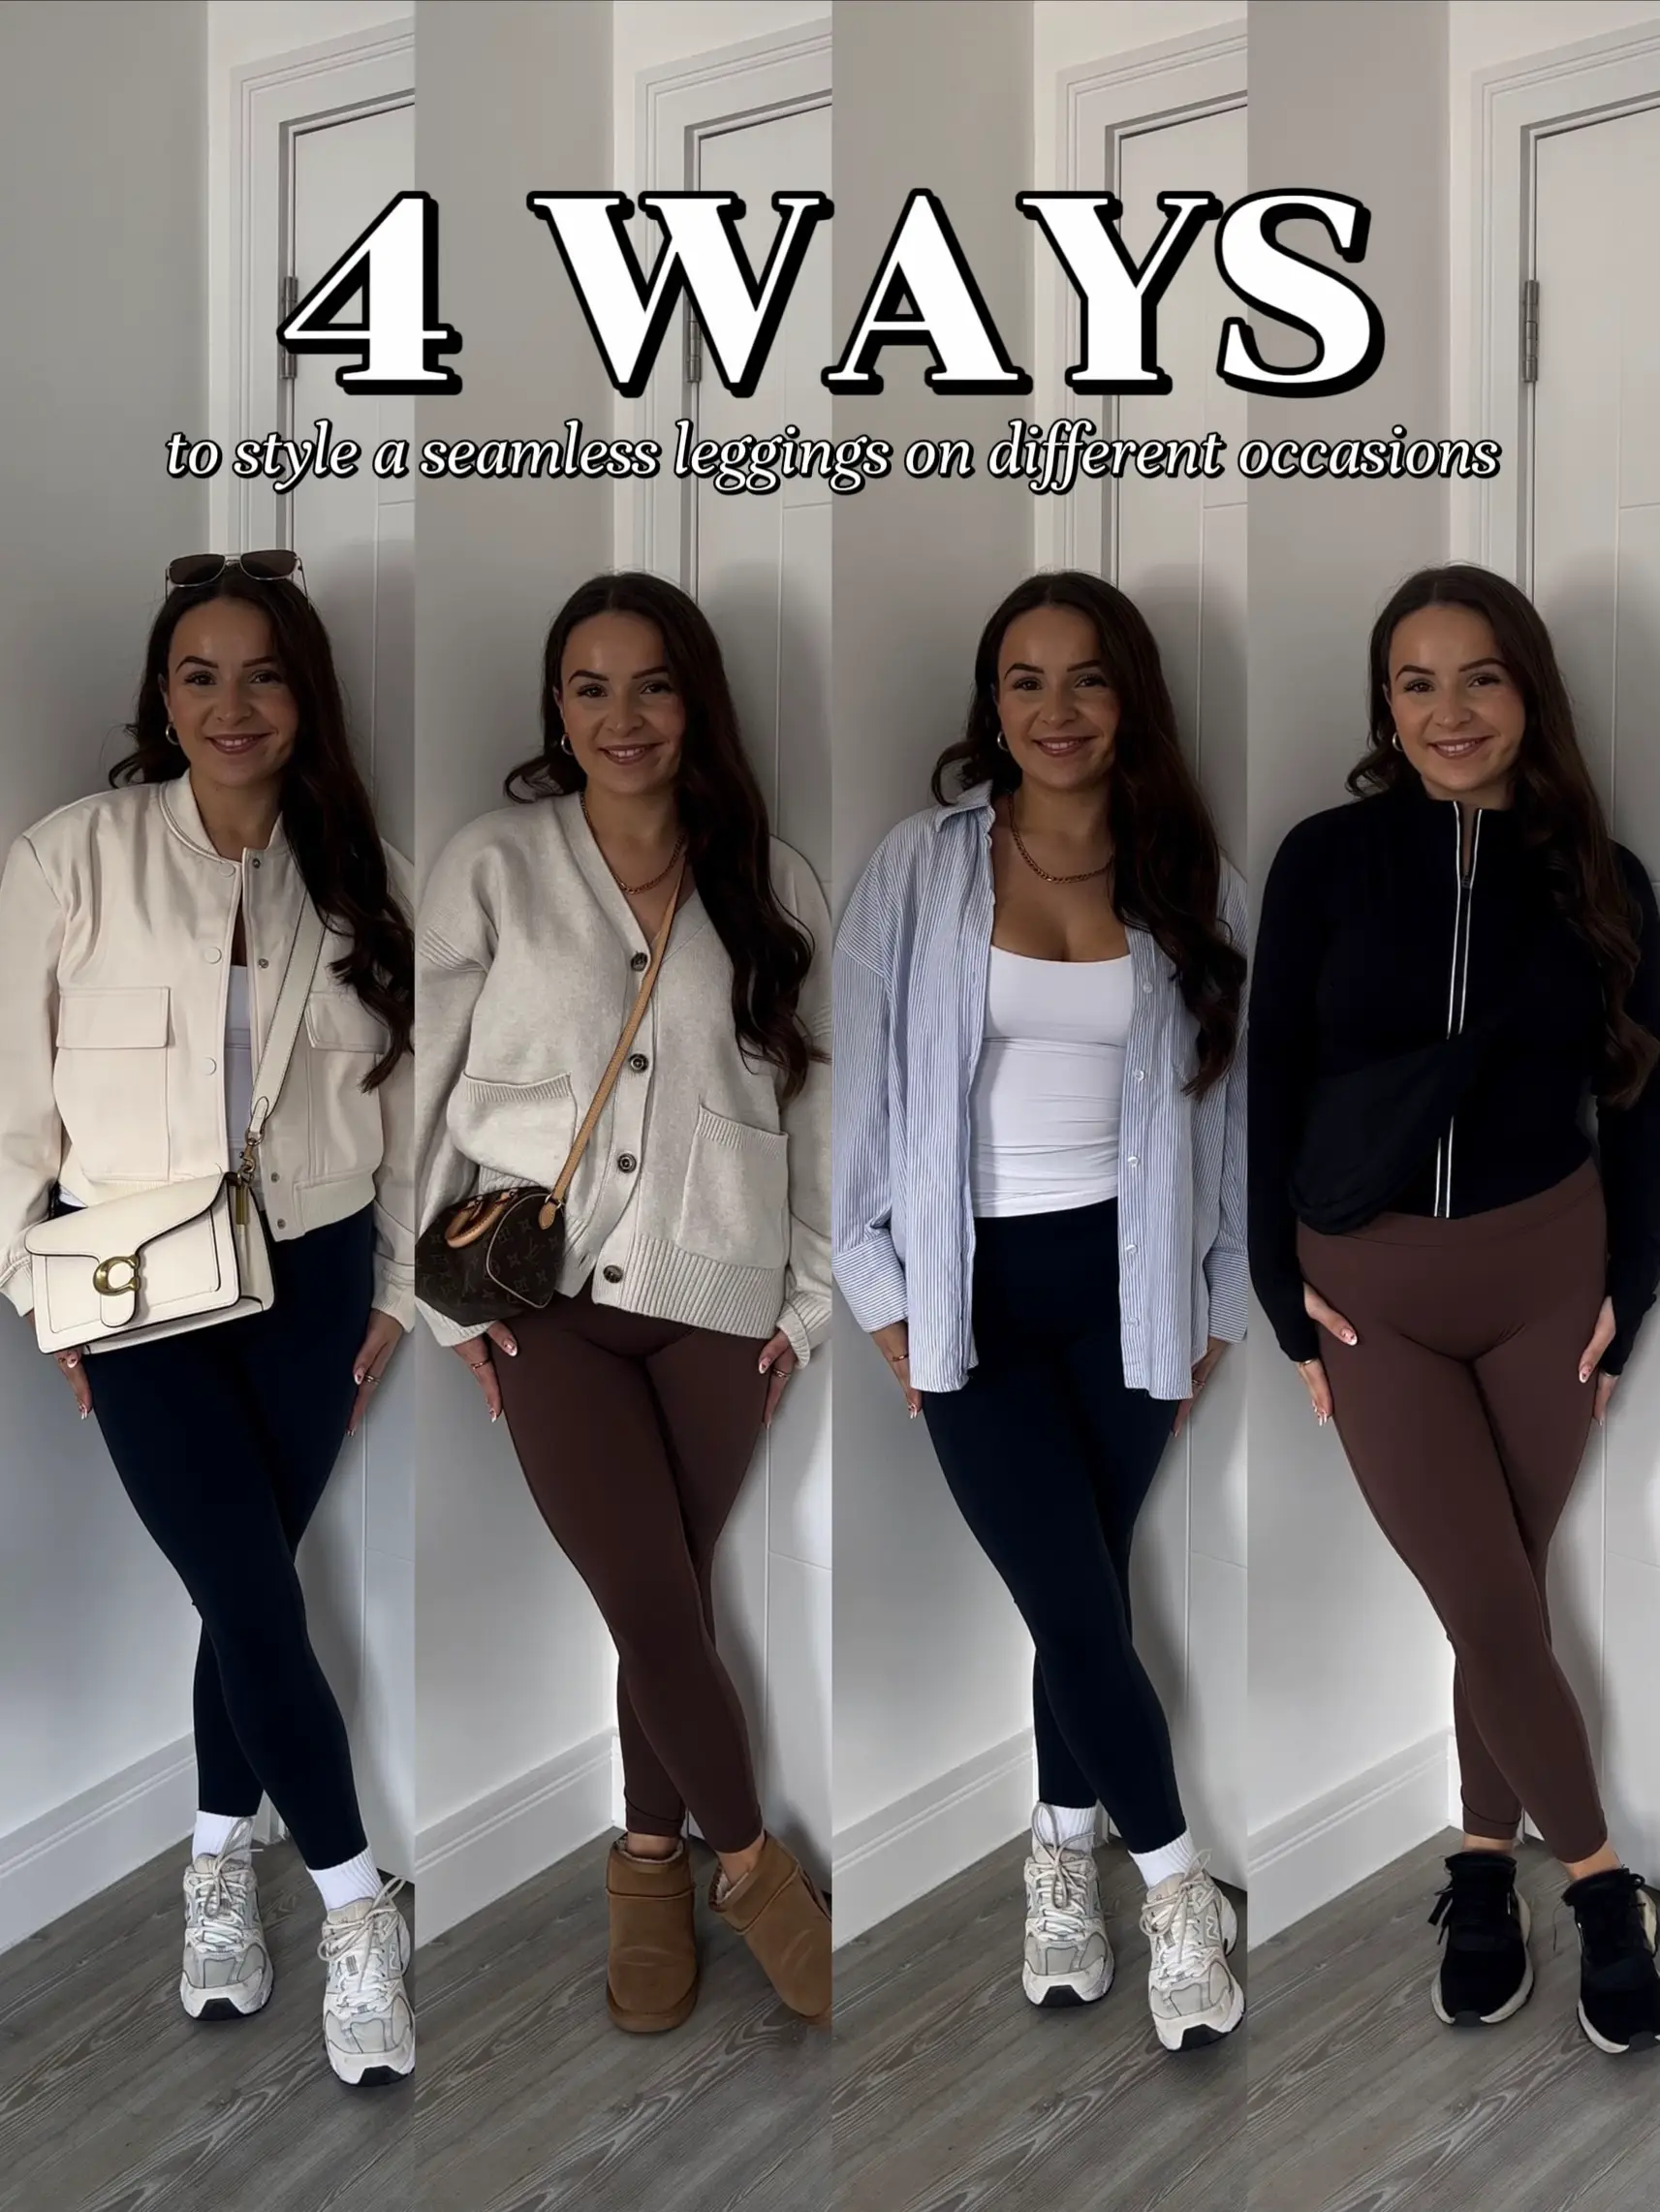 4 Ways to Style Leggings, Gallery posted by sideofsequins